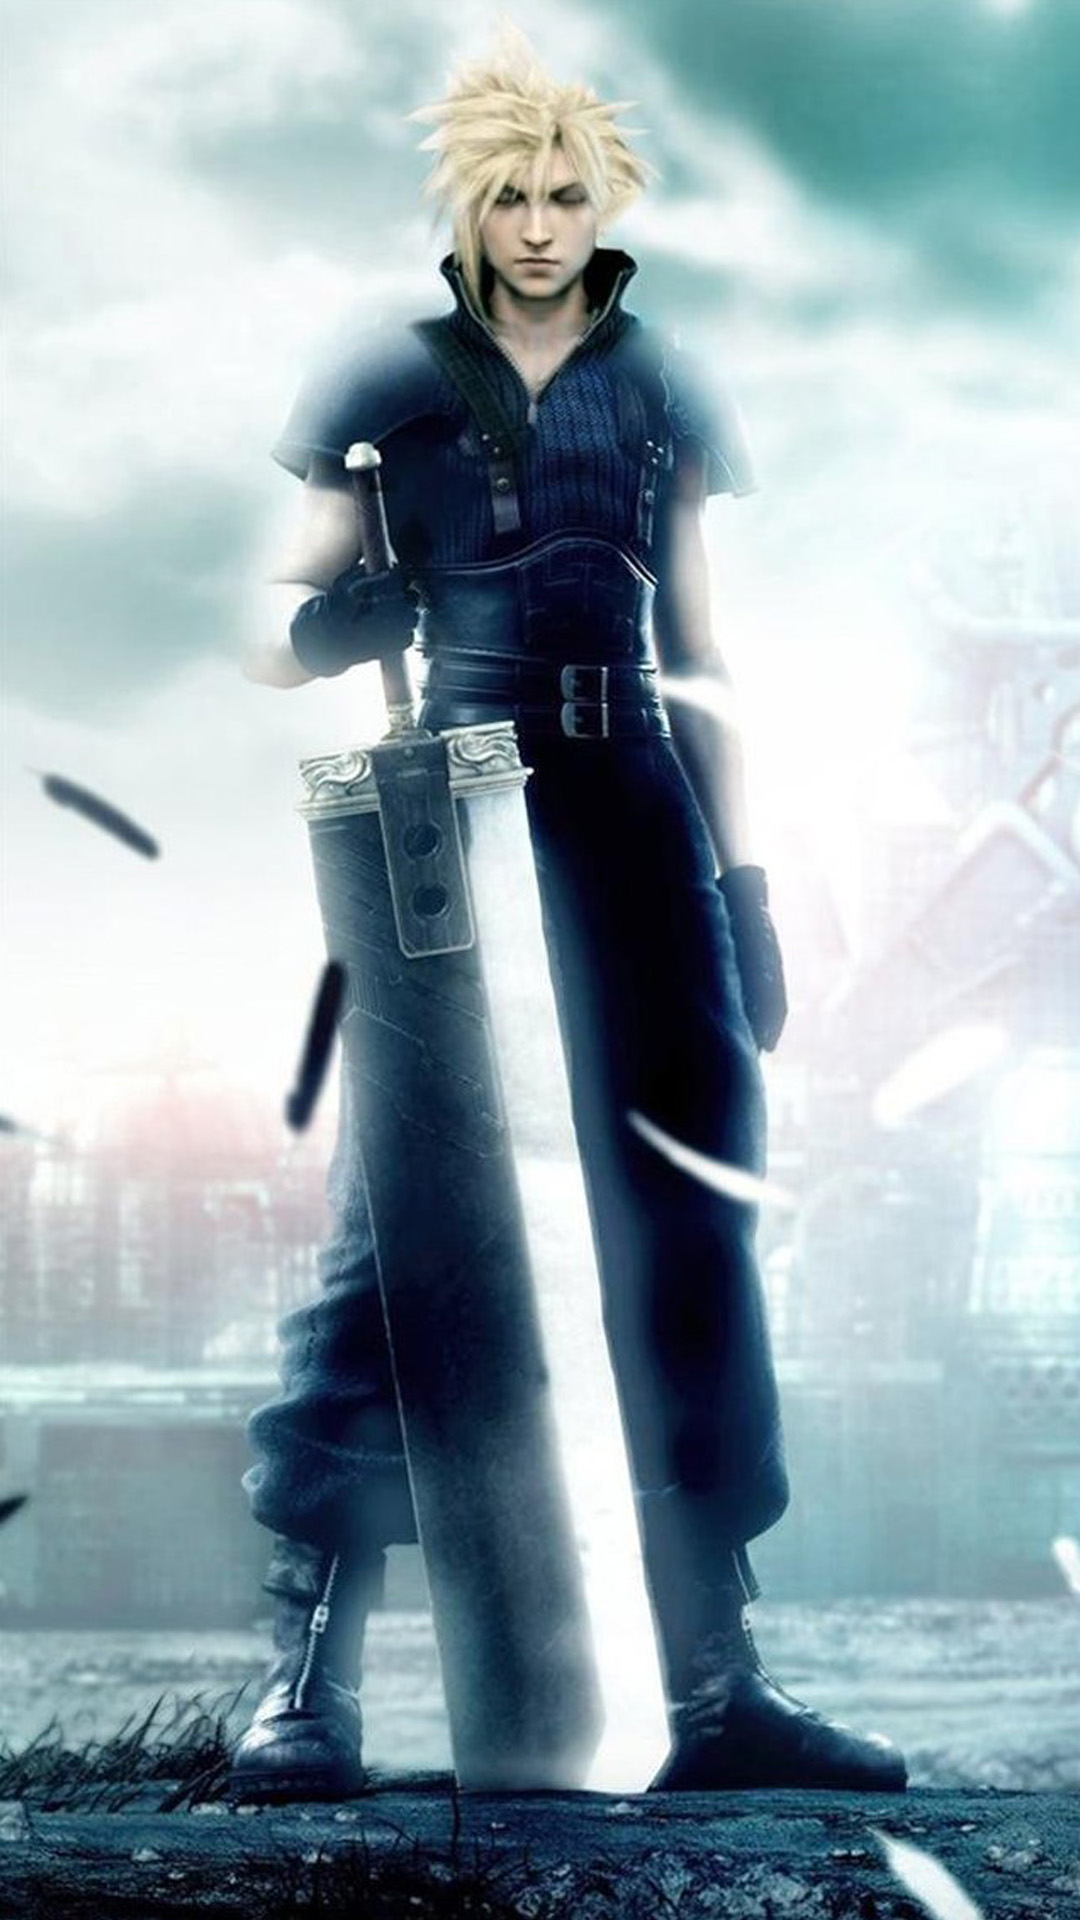 Final Fantasy 7 Cloud Strife Android Wallpaper Android Hd Wallpapers